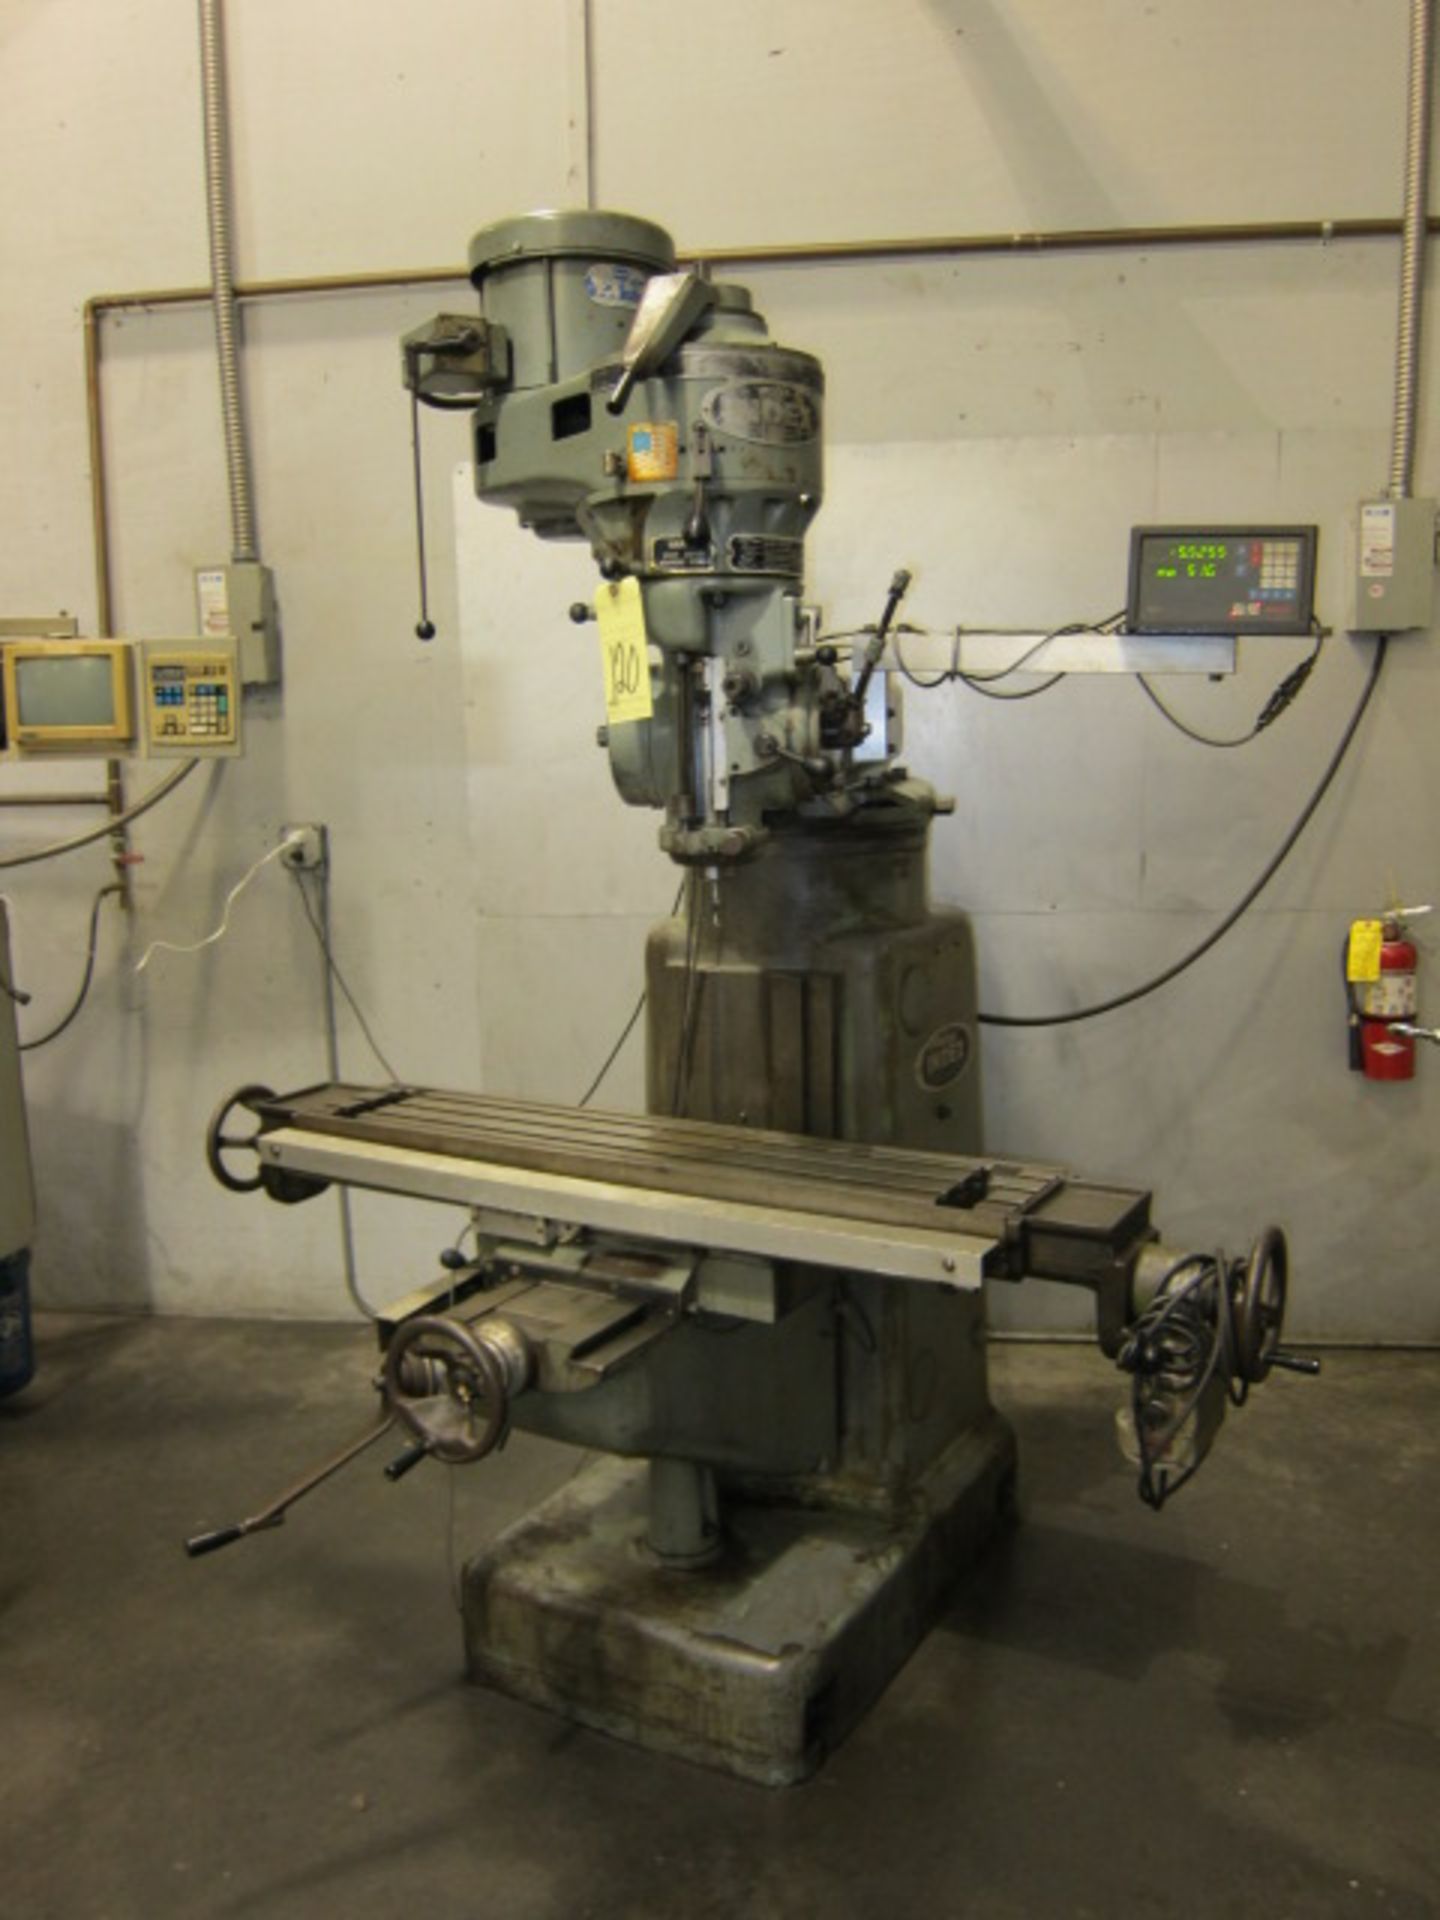 VERTICAL TURRET MILL, WELLS INDEX MDL. 847, 9" x 48" table w/pwr. feed, spds: 50-4200 RPM, 2-axis